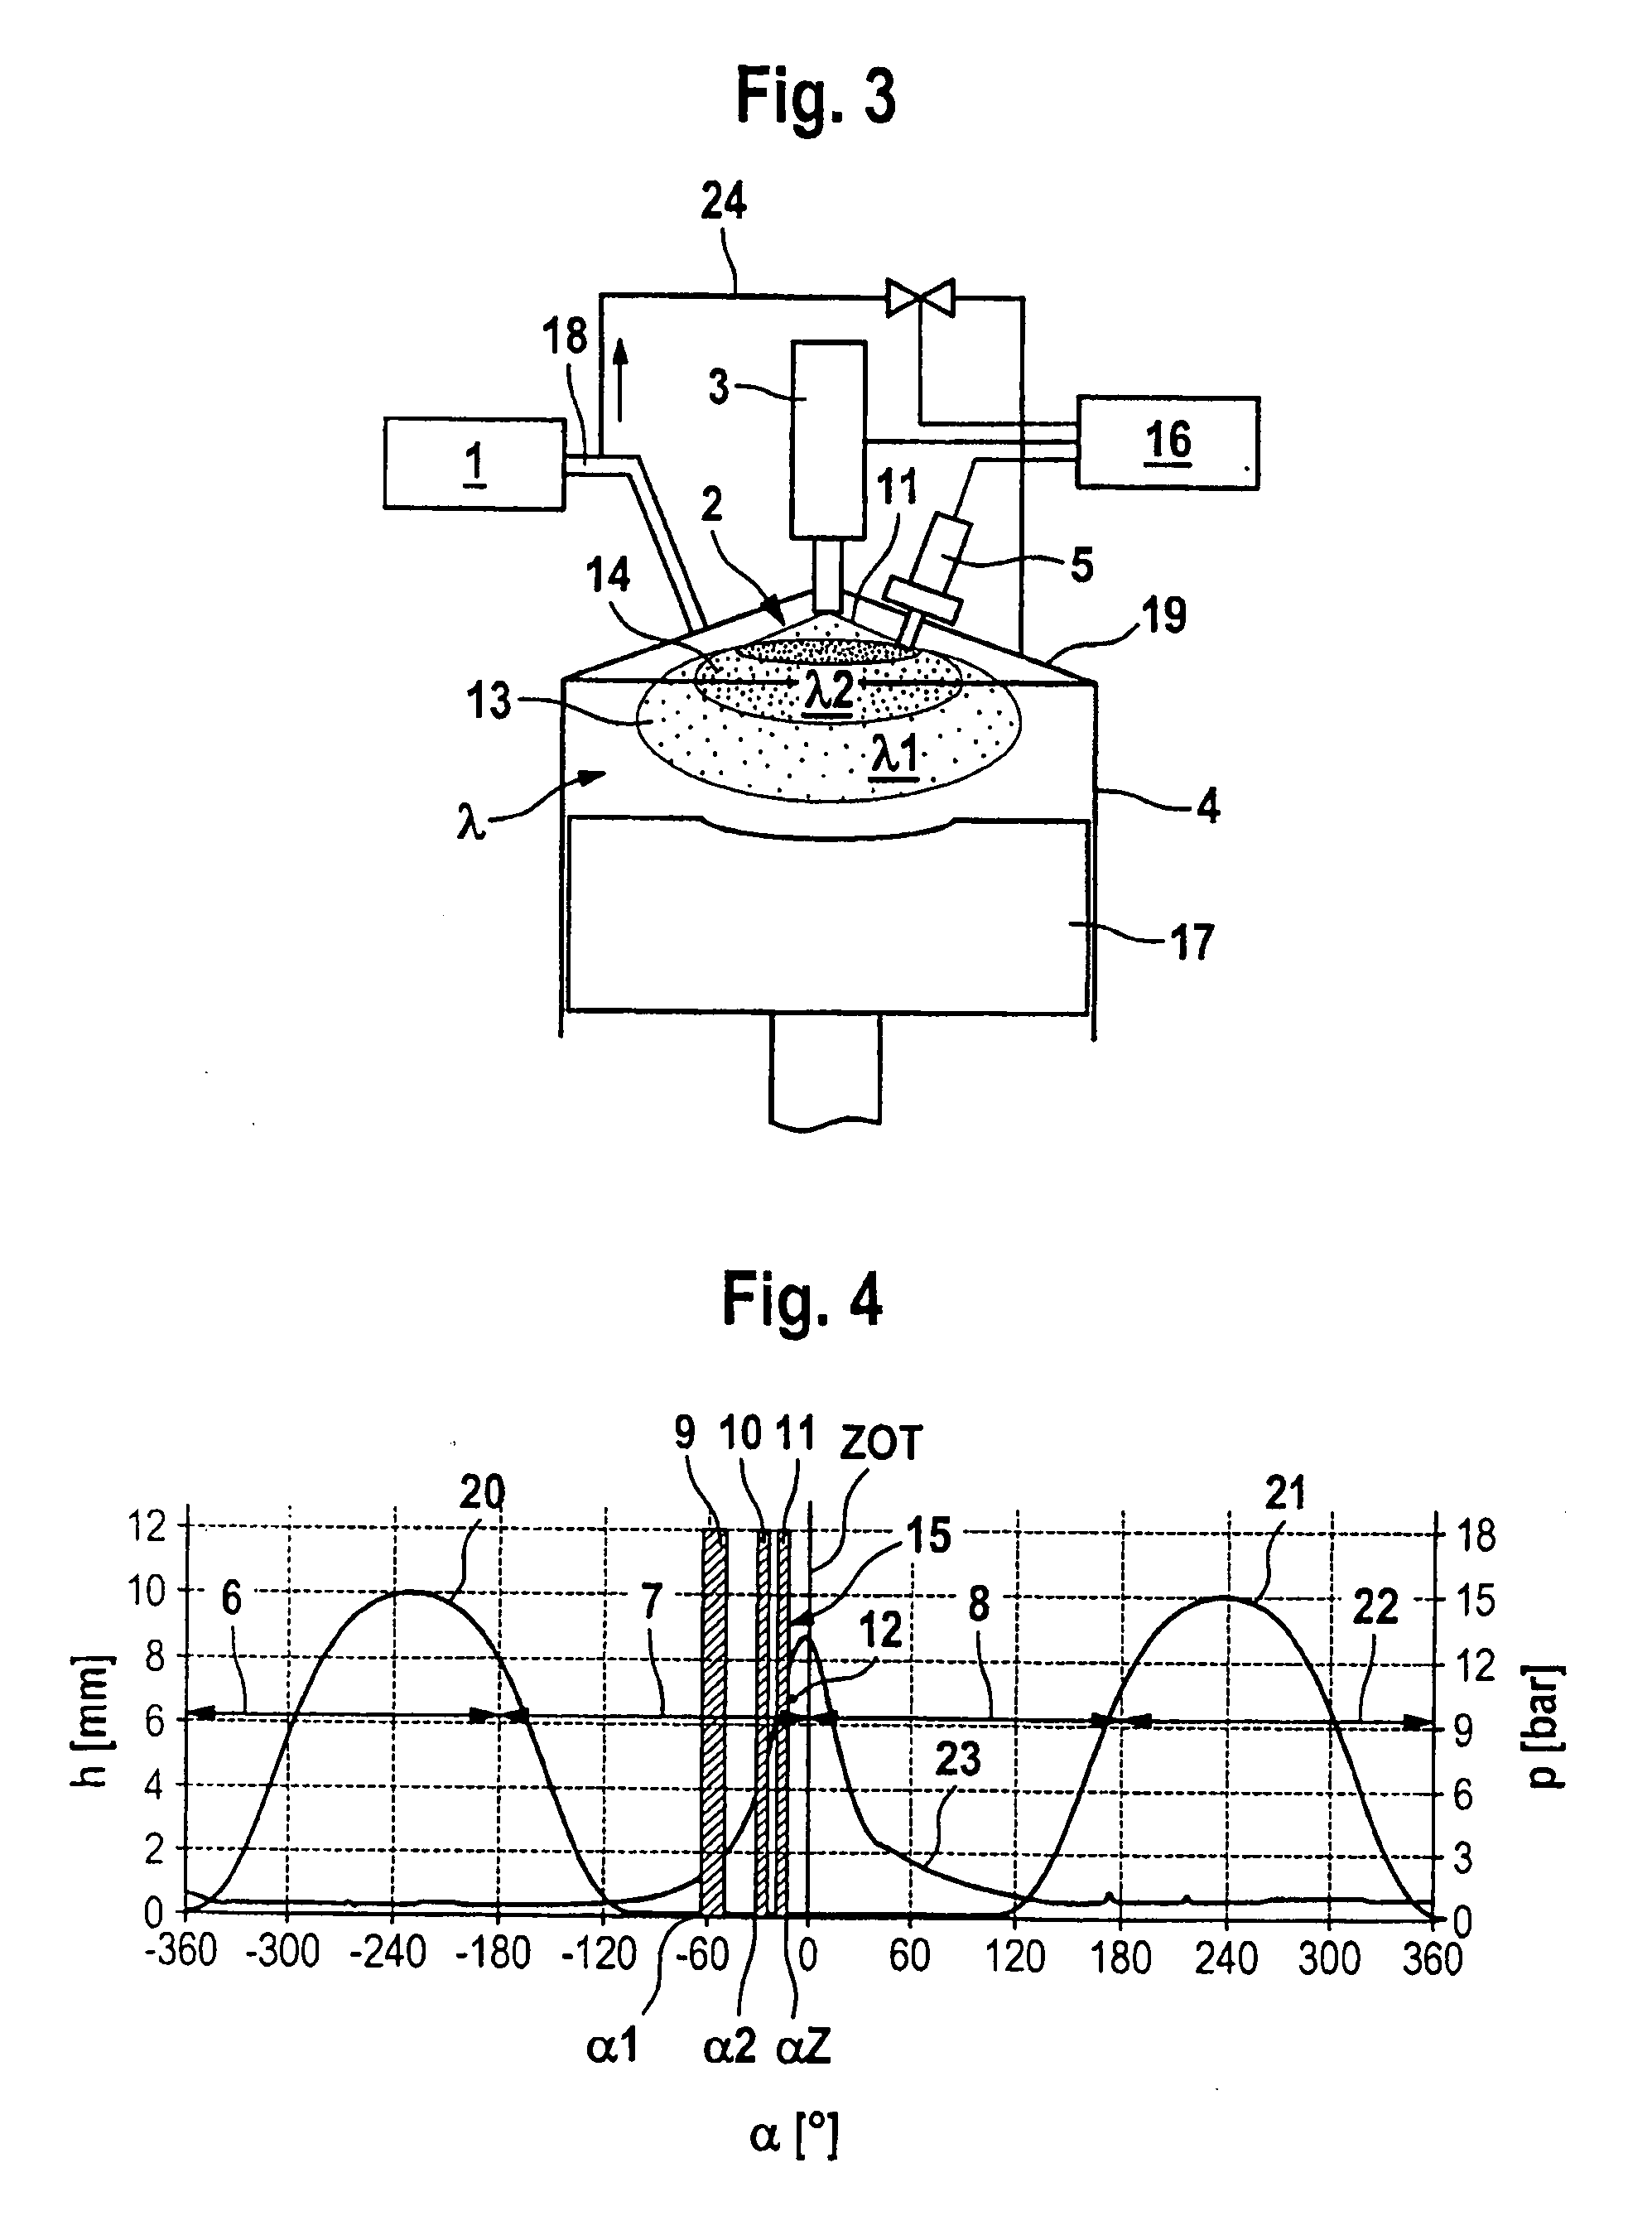 Method of operating a spark ignition internal combustion engine